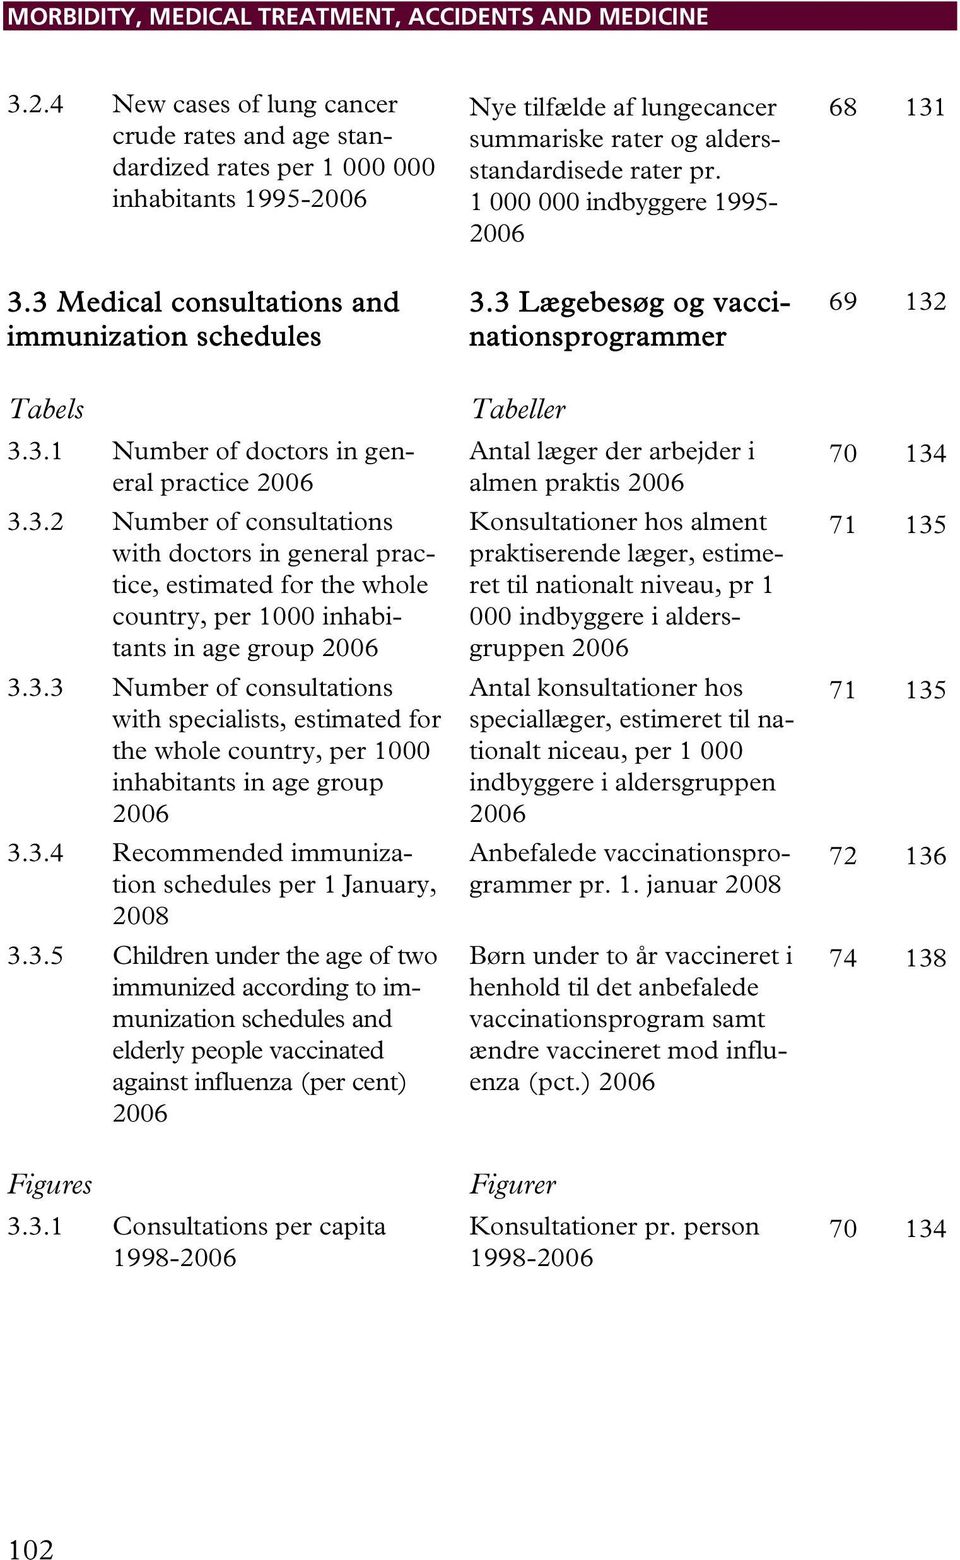 3.4 Recommended immunization schedules per 1 January, 2008 3.3.5 Children under the age of two immunized according to immunization schedules and elderly people vaccinated against influenza (per cent) 2006 Figures 3.